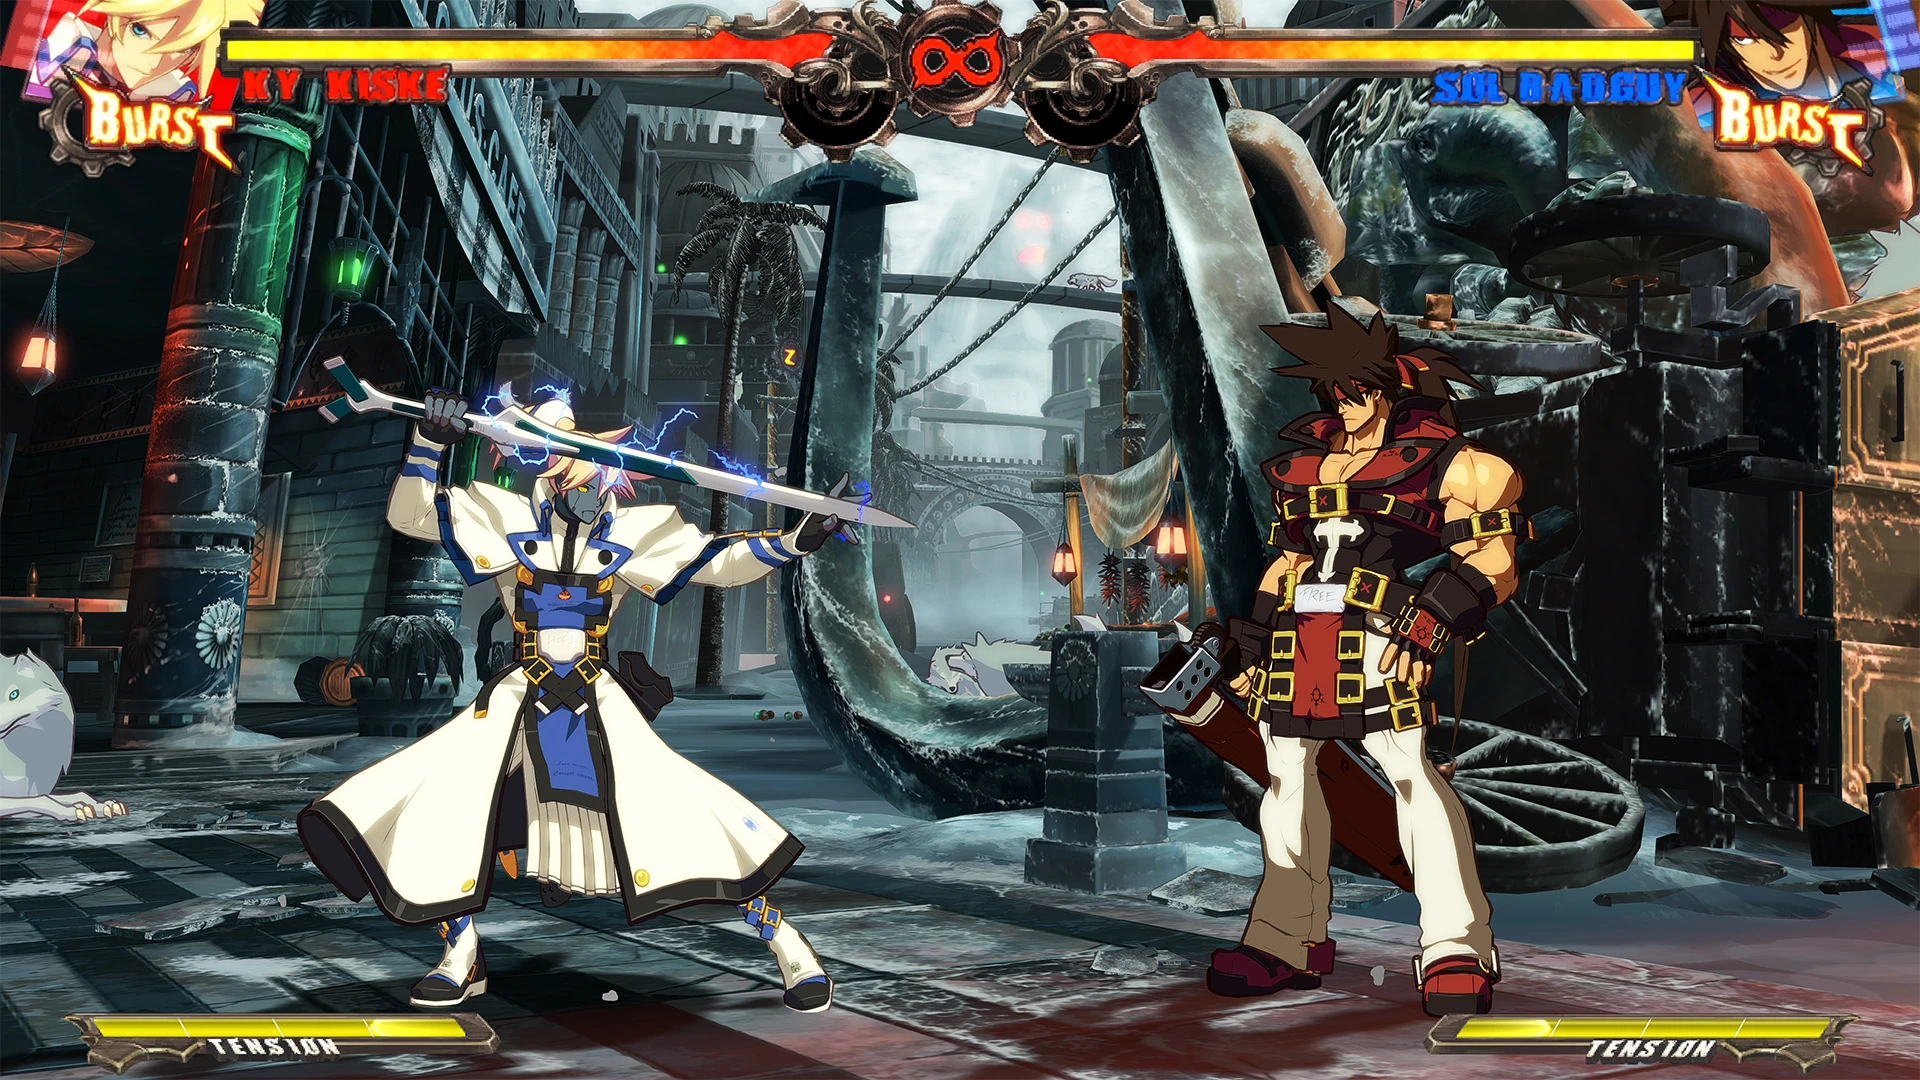 Roy Ky Kiske at Guilty Gear Xrd Nexus - Mods and Community